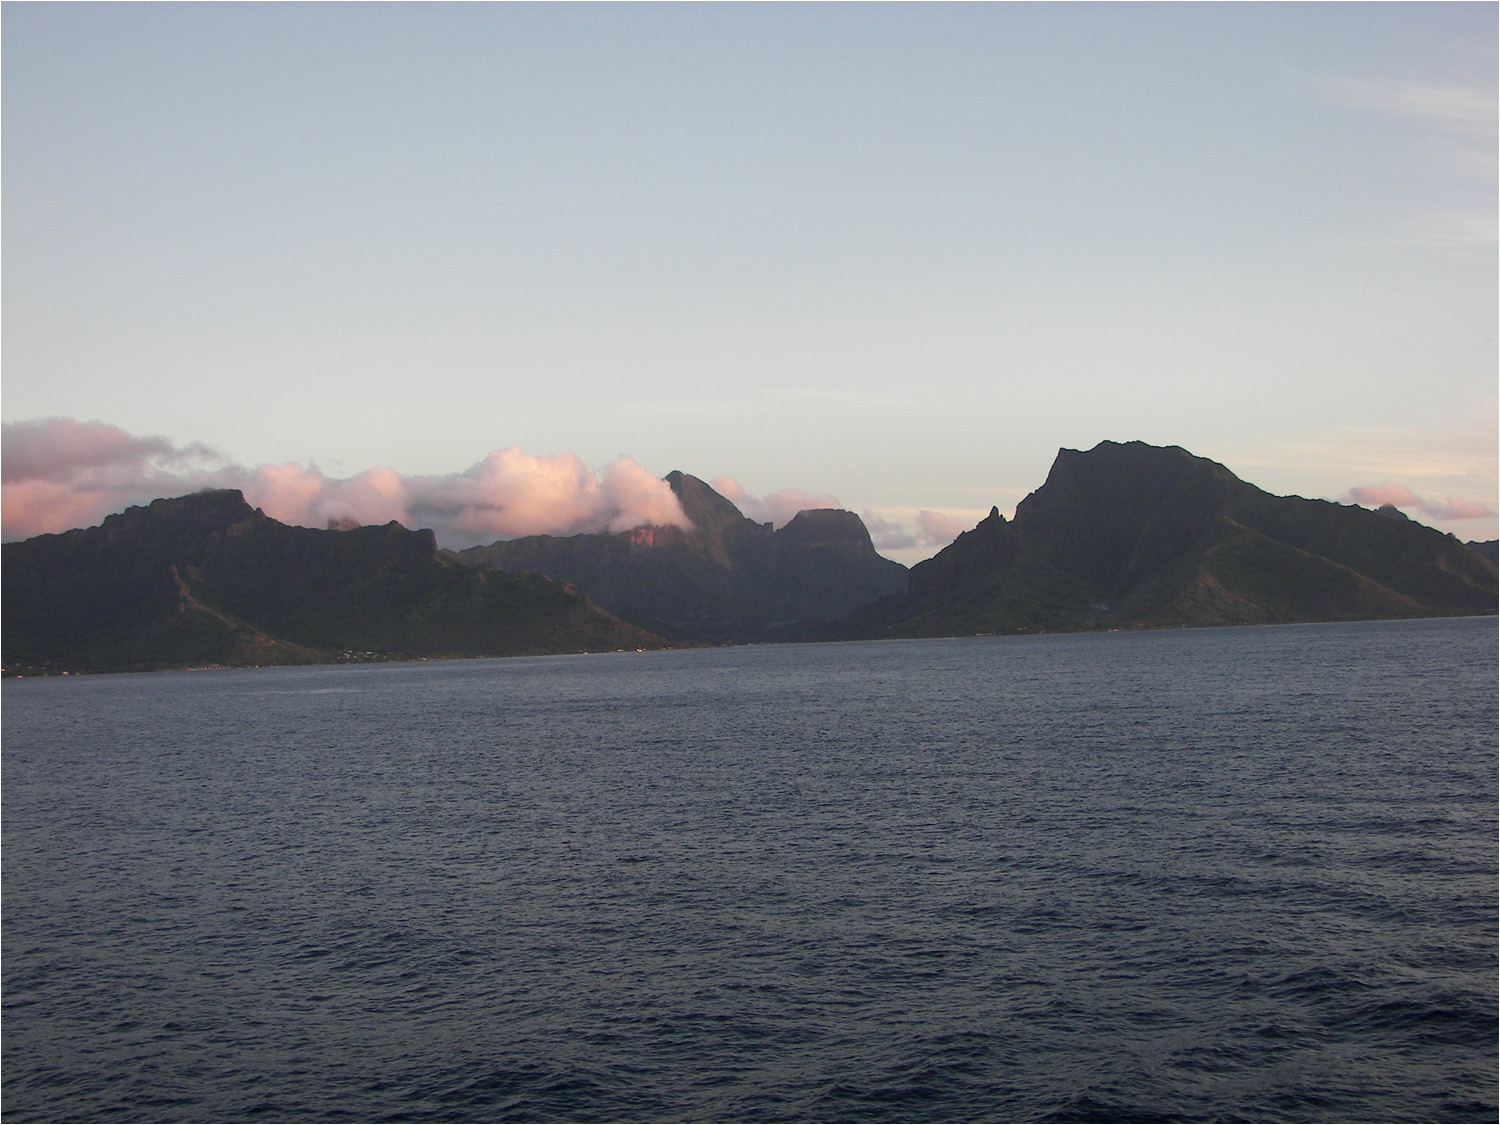 Leaving Moorea on our way back to Papeete, Tahiti Sunday evening